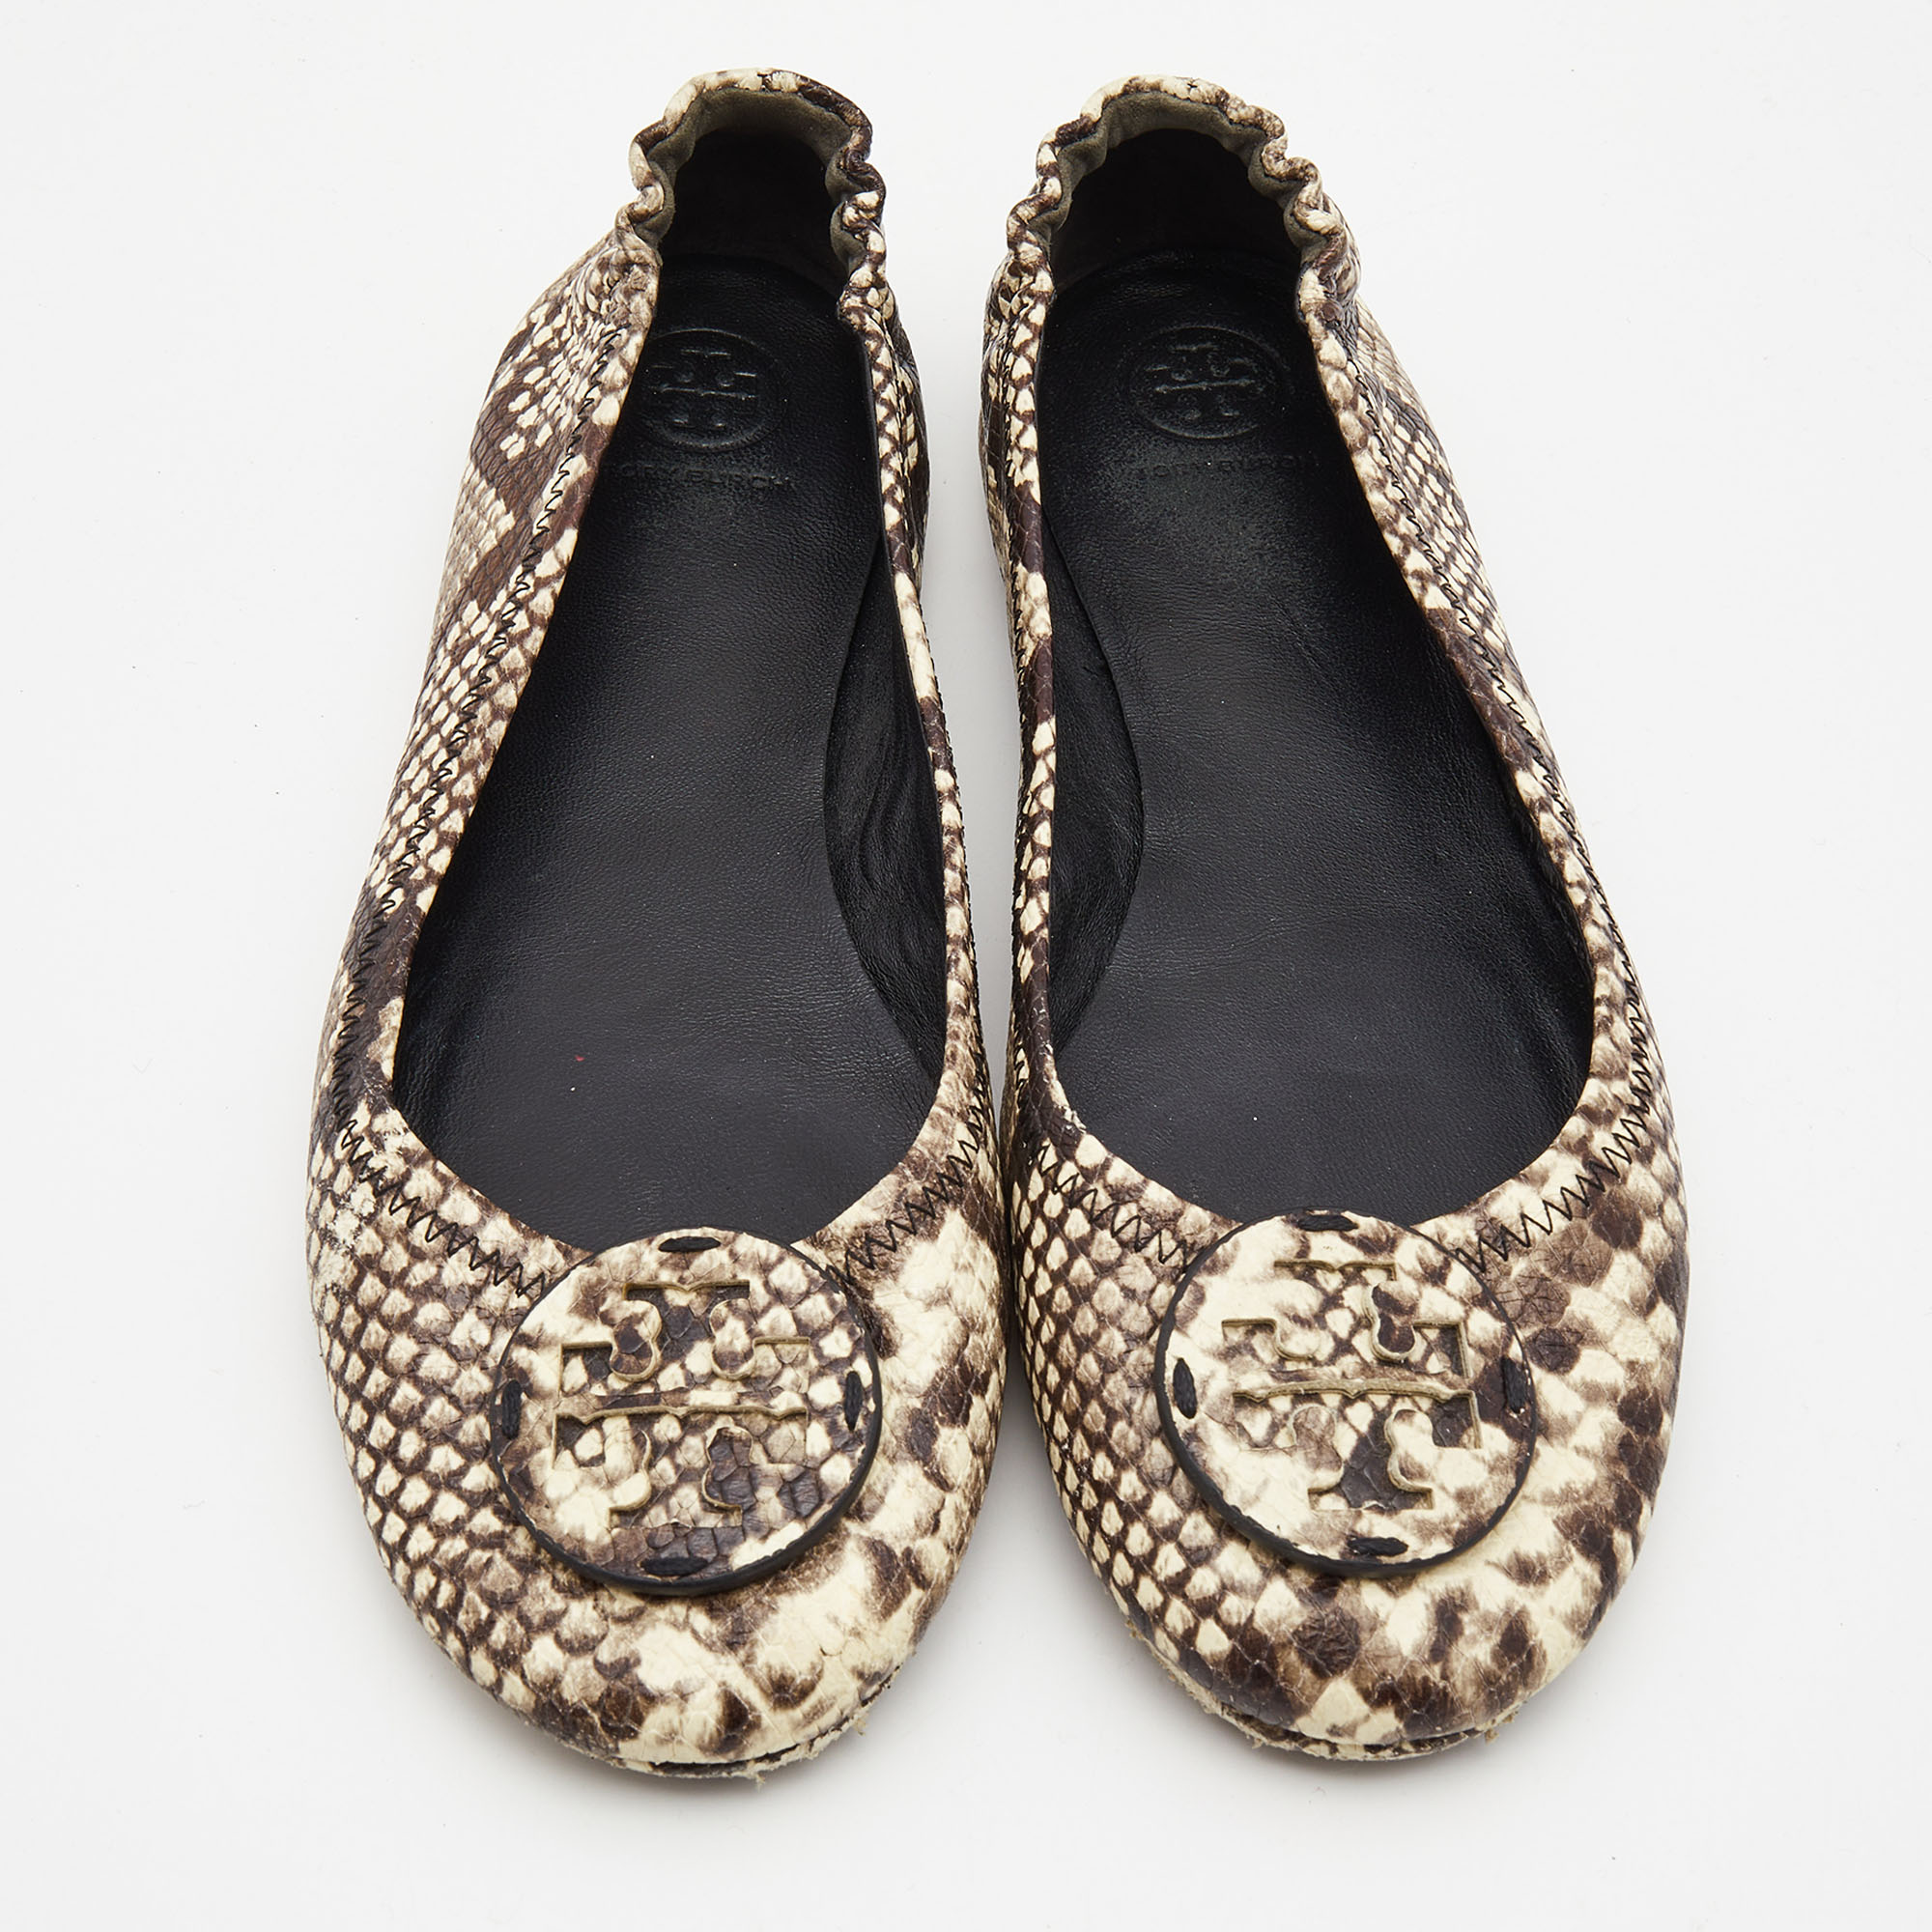 Tory Burch Beige/Brown Python Embossed Leather Ballet Flats Size 39.5